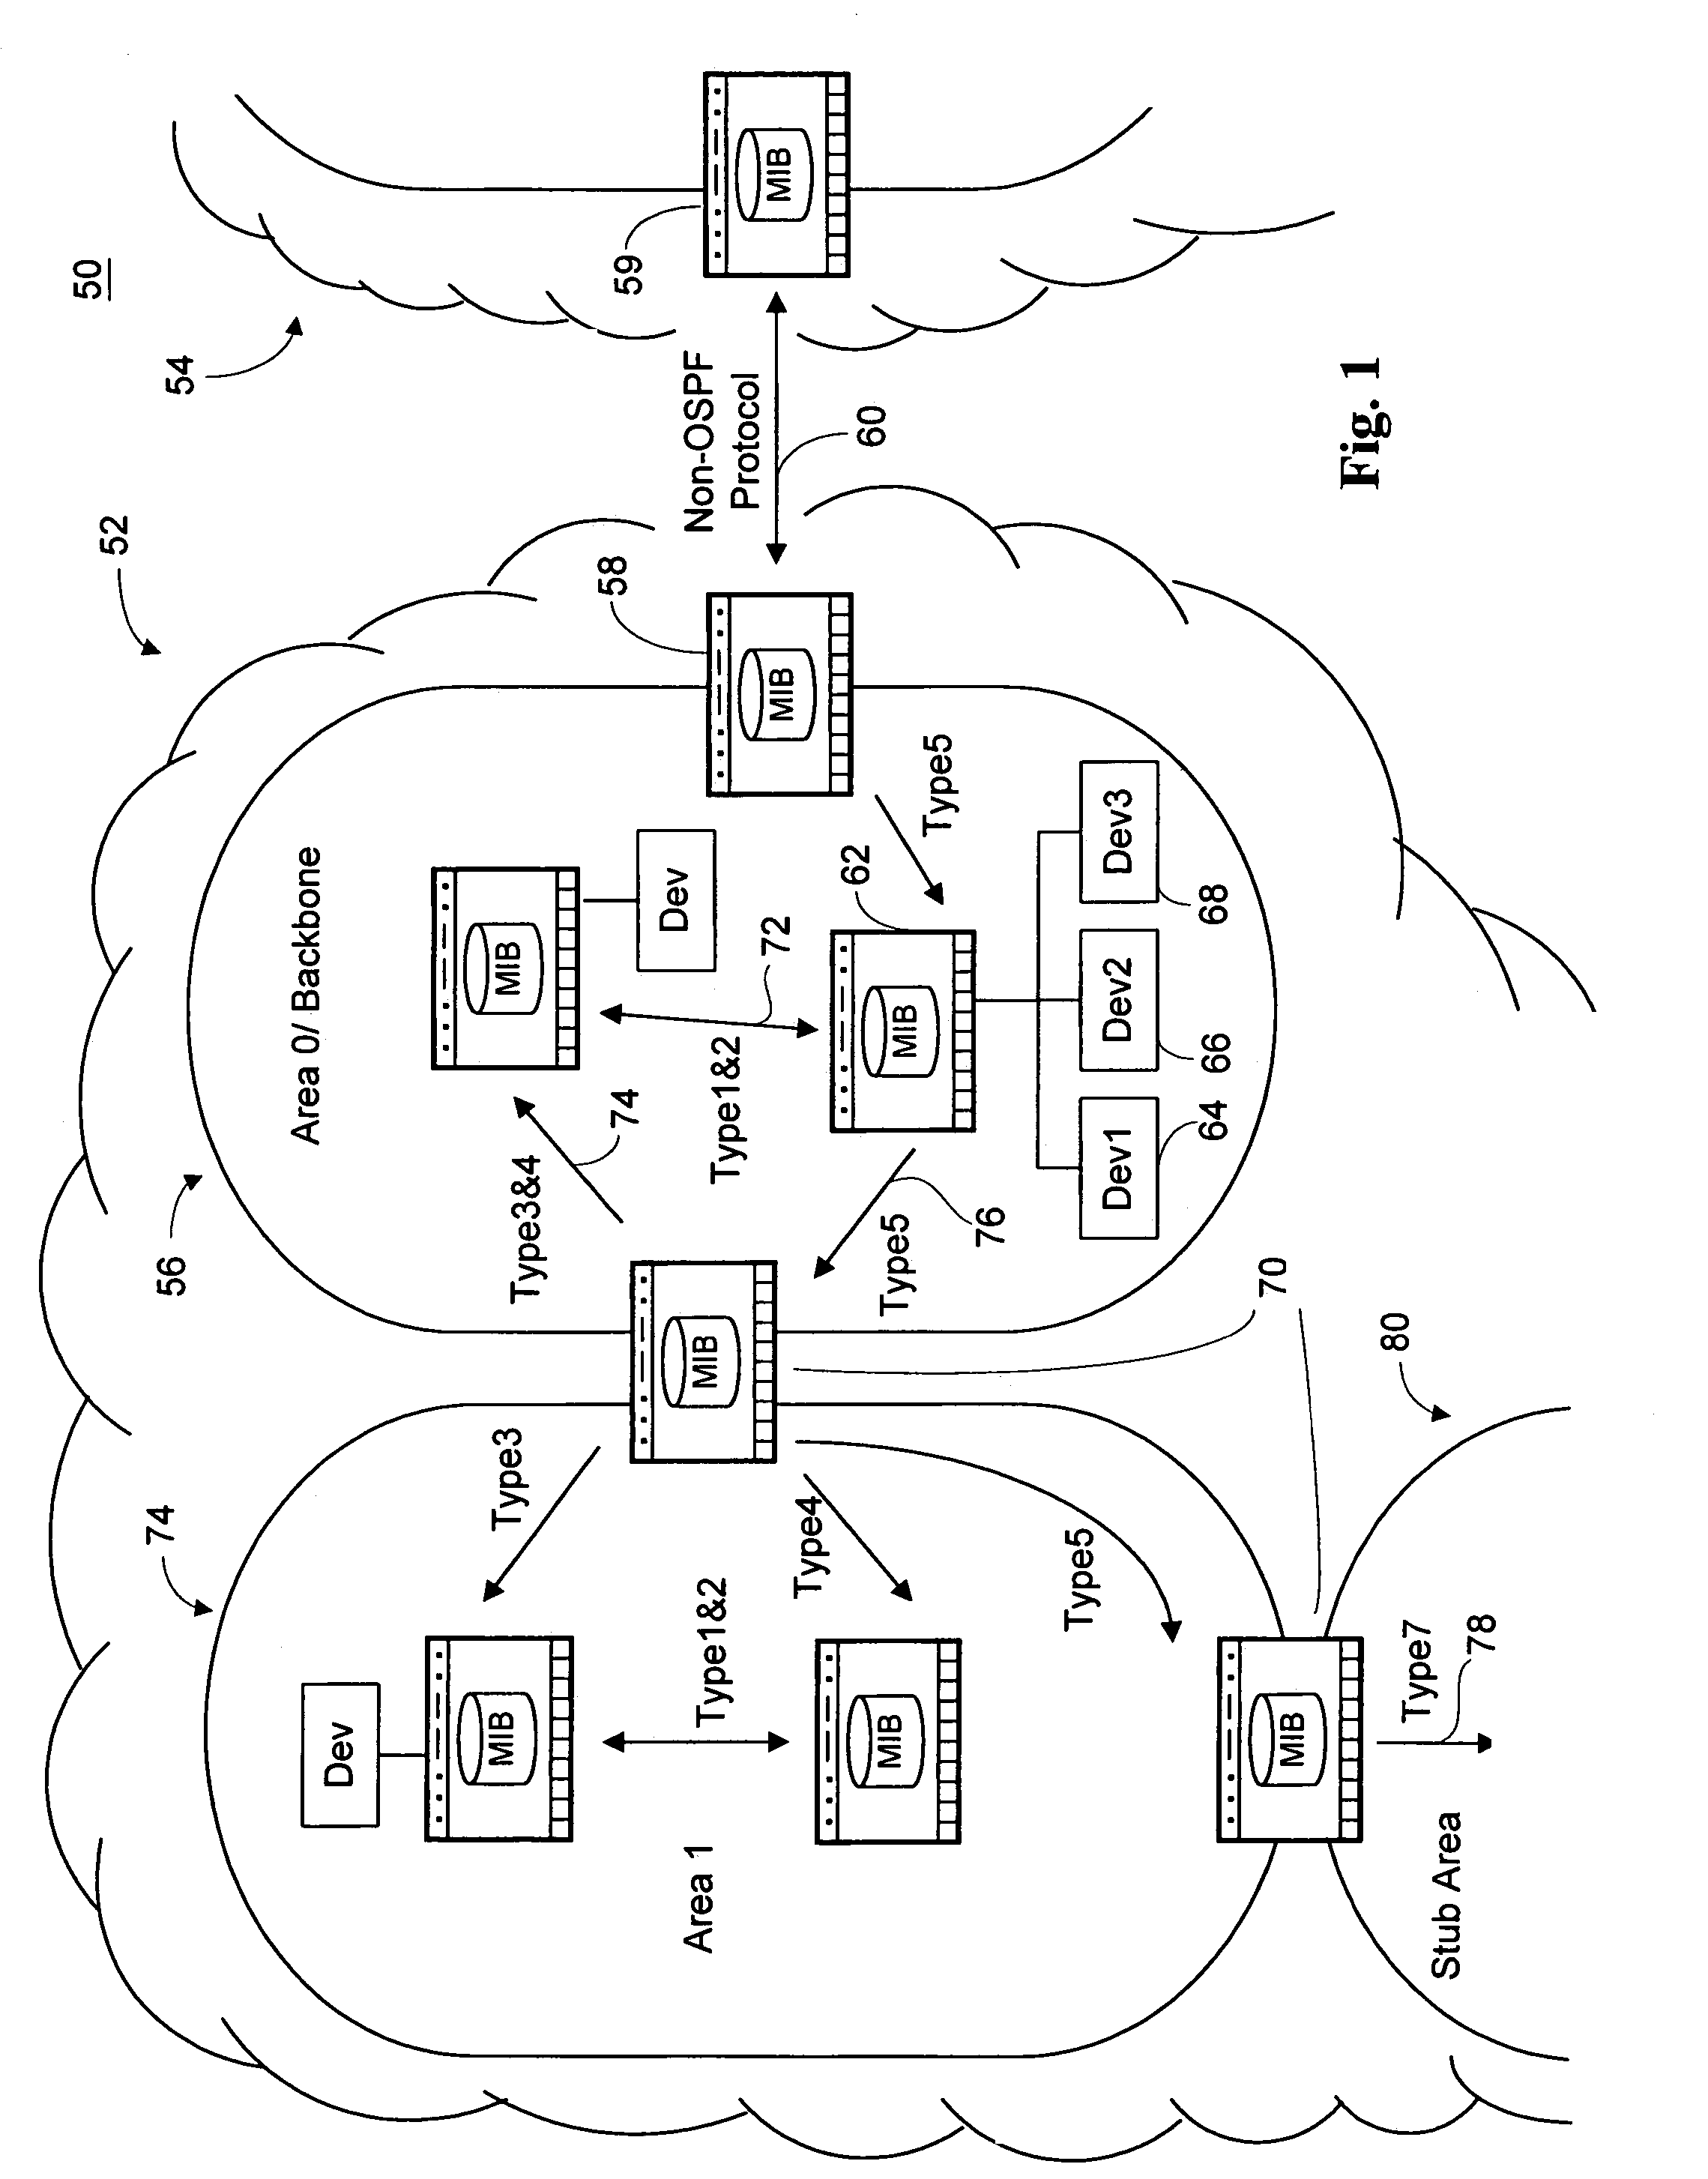 Method and system for determining network characteristics using routing protocols